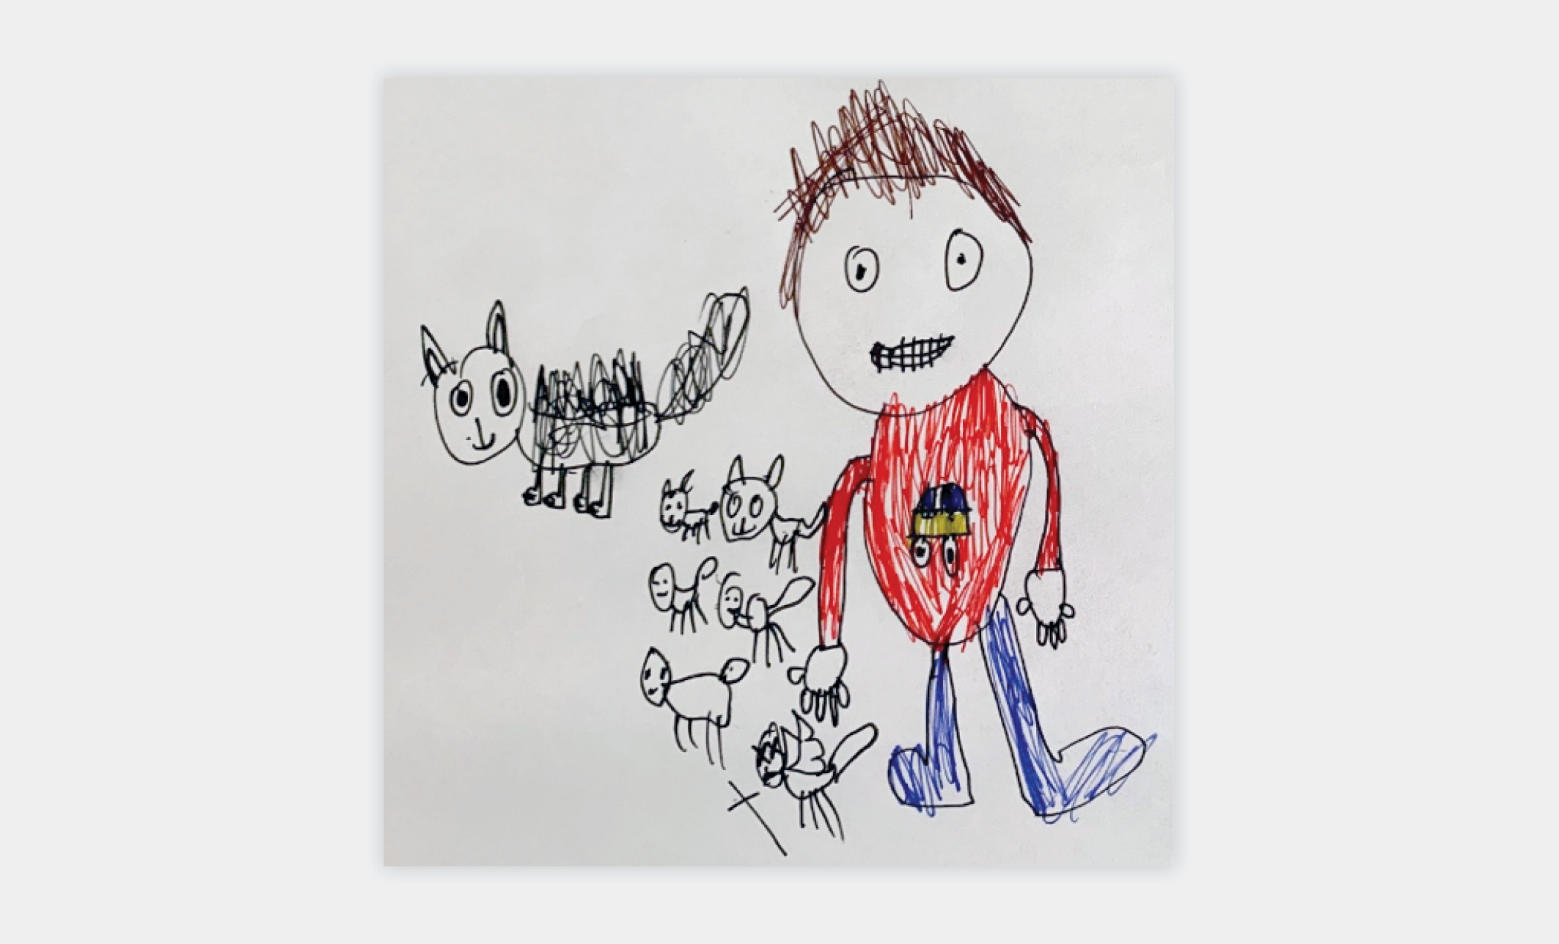 Isaac’s self-portrait, with cat and kittens